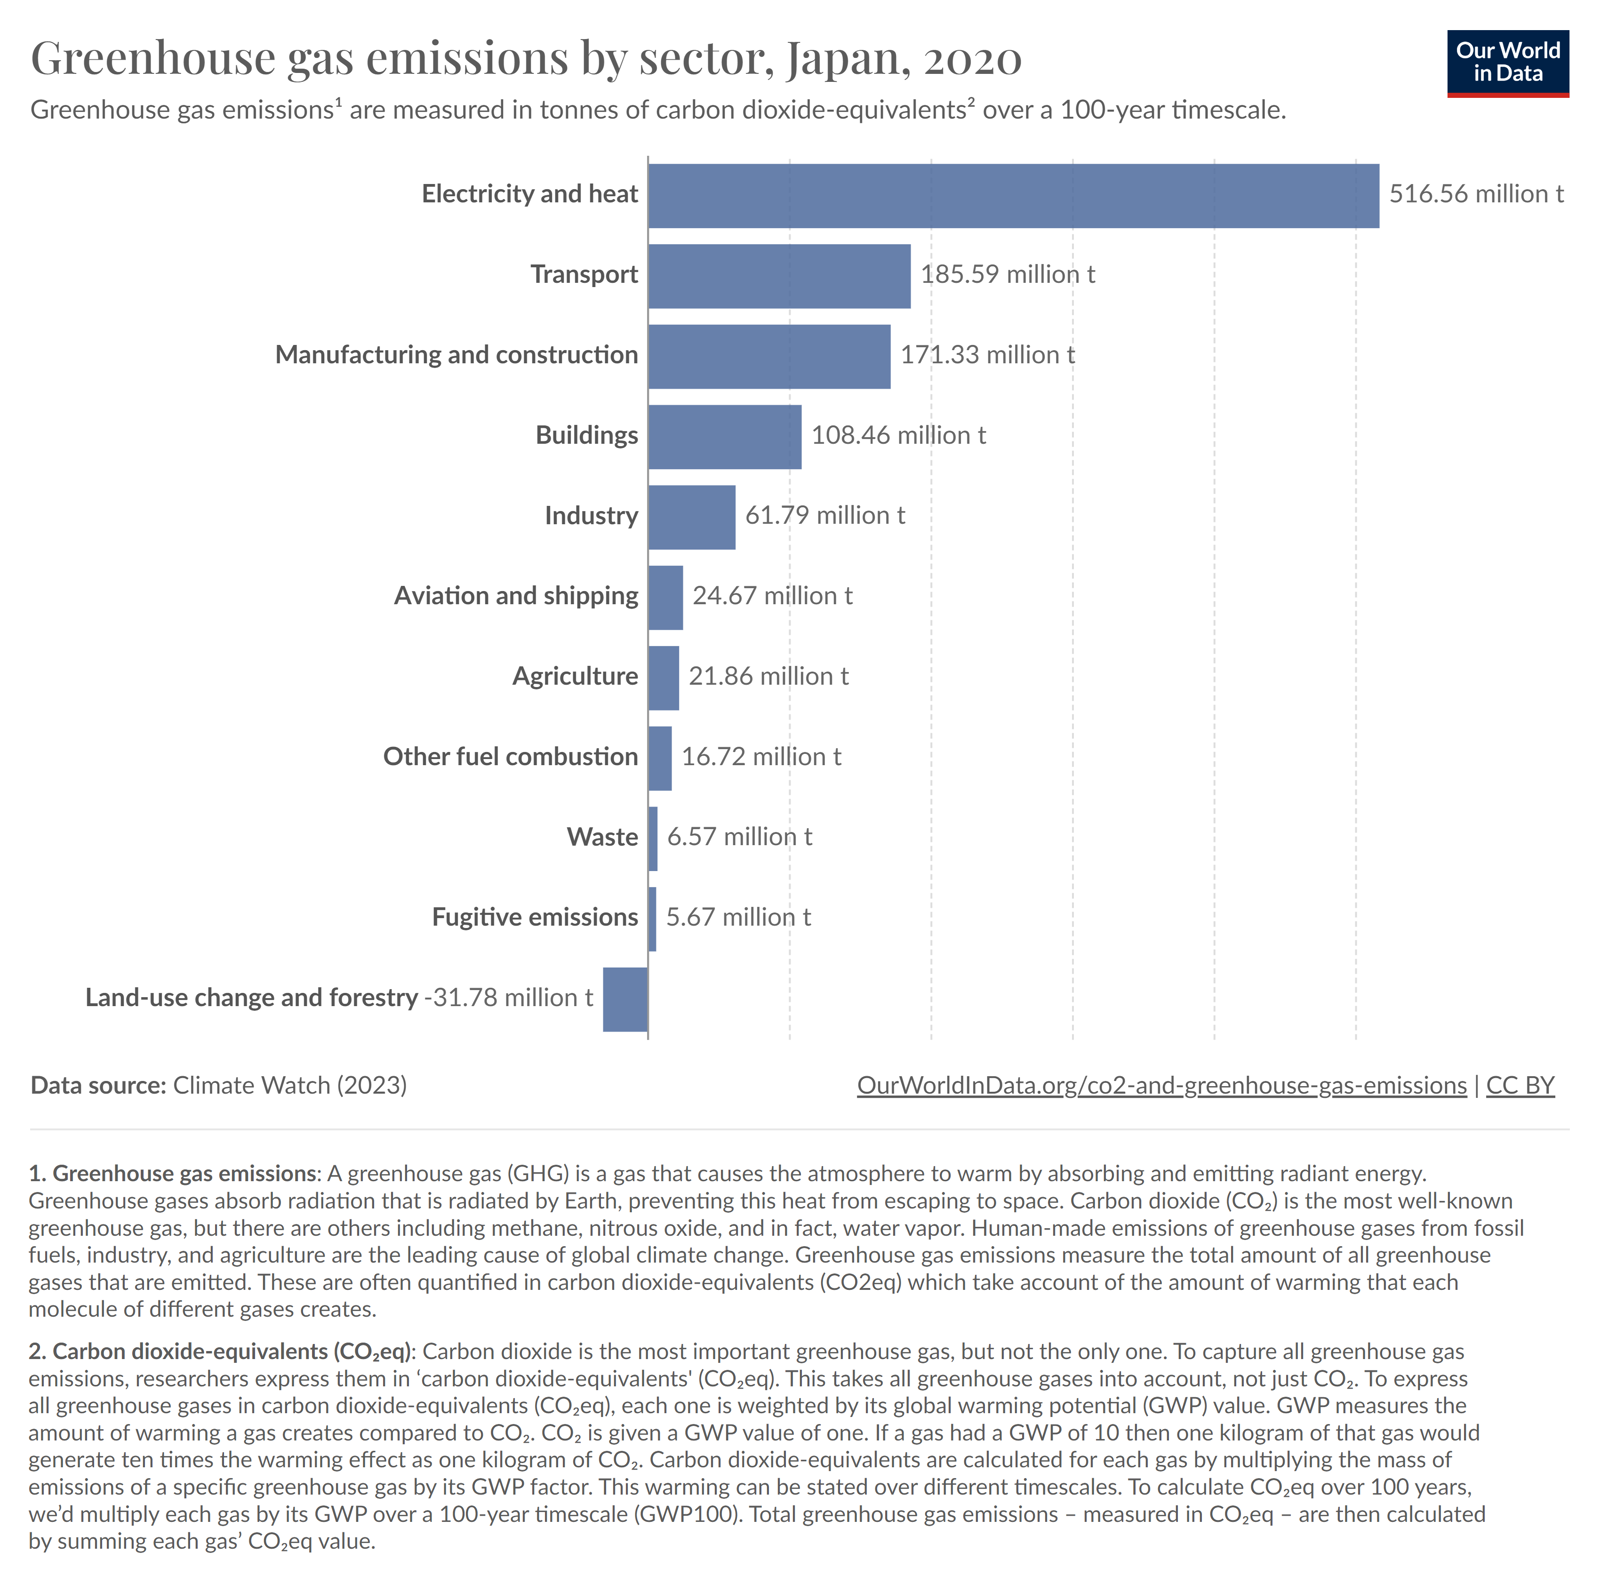 Japan’s Greenhouse Gas Emissions by Sector